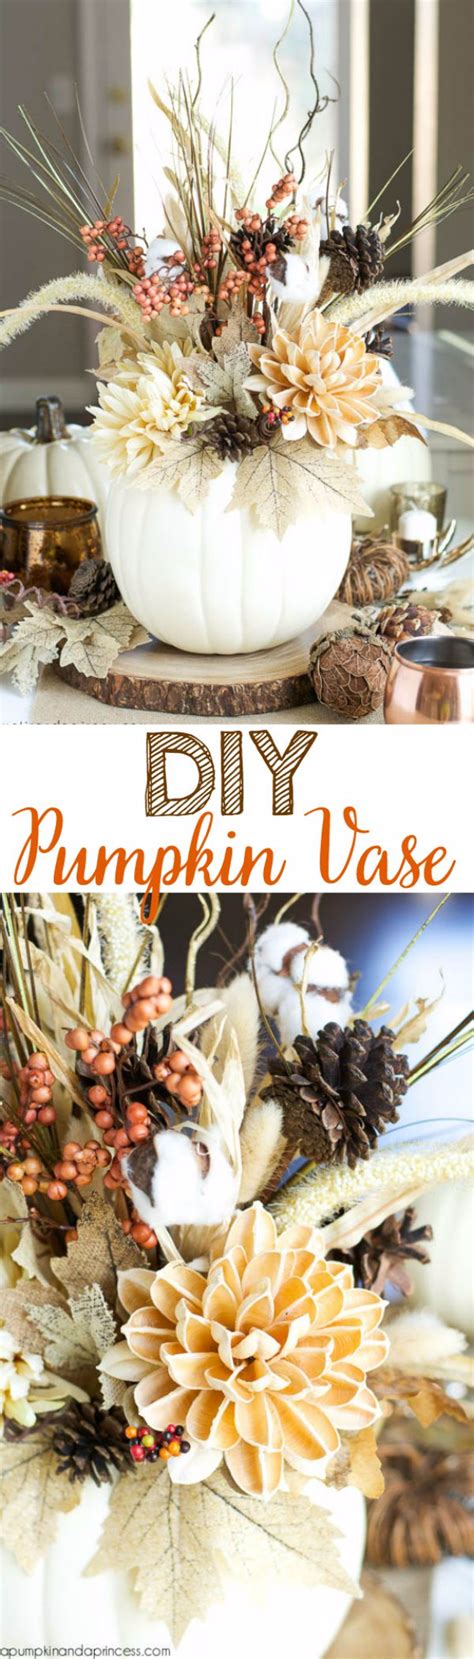 Our collection includes photos and tips so you can get. 17 Wonderful DIY Home Decor Ideas For This Fall